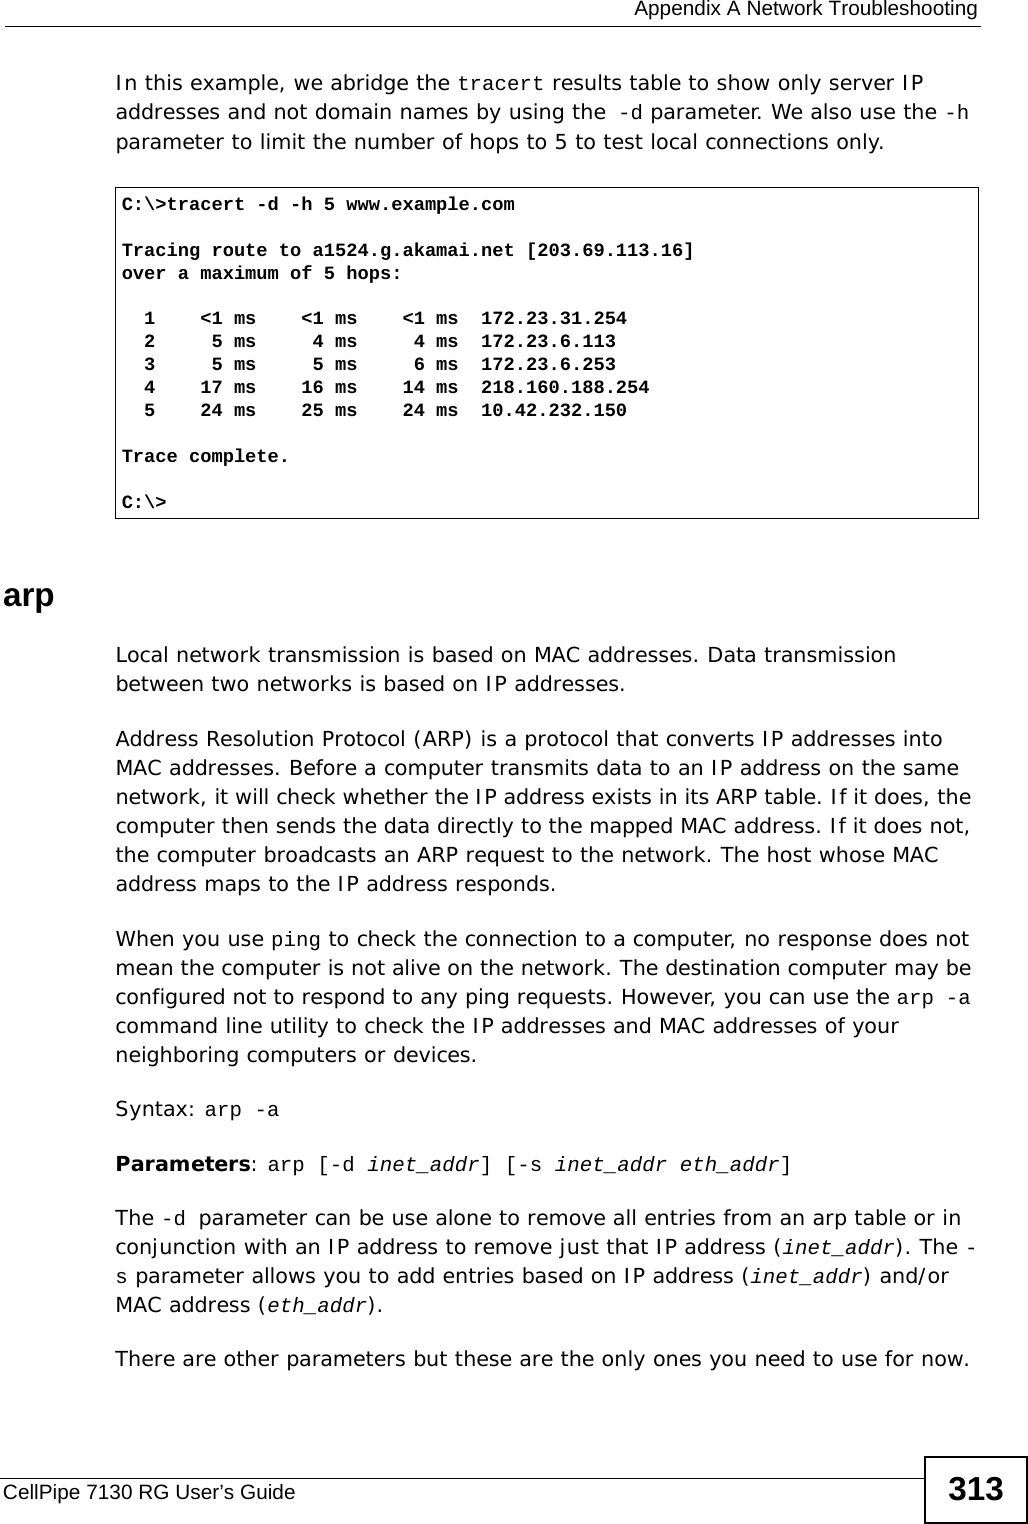  Appendix A Network TroubleshootingCellPipe 7130 RG User’s Guide 313In this example, we abridge the tracert results table to show only server IP addresses and not domain names by using the -d parameter. We also use the -h parameter to limit the number of hops to 5 to test local connections only. arpLocal network transmission is based on MAC addresses. Data transmission between two networks is based on IP addresses.Address Resolution Protocol (ARP) is a protocol that converts IP addresses into MAC addresses. Before a computer transmits data to an IP address on the same network, it will check whether the IP address exists in its ARP table. If it does, the computer then sends the data directly to the mapped MAC address. If it does not, the computer broadcasts an ARP request to the network. The host whose MAC address maps to the IP address responds.When you use ping to check the connection to a computer, no response does not mean the computer is not alive on the network. The destination computer may be configured not to respond to any ping requests. However, you can use the arp -a command line utility to check the IP addresses and MAC addresses of your neighboring computers or devices. Syntax: arp -aParameters: arp [-d inet_addr] [-s inet_addr eth_addr]The -d parameter can be use alone to remove all entries from an arp table or in conjunction with an IP address to remove just that IP address (inet_addr). The -s parameter allows you to add entries based on IP address (inet_addr) and/or MAC address (eth_addr).There are other parameters but these are the only ones you need to use for now.C:\&gt;tracert -d -h 5 www.example.comTracing route to a1524.g.akamai.net [203.69.113.16]over a maximum of 5 hops:  1    &lt;1 ms    &lt;1 ms    &lt;1 ms  172.23.31.254  2     5 ms     4 ms     4 ms  172.23.6.113  3     5 ms     5 ms     6 ms  172.23.6.253  4    17 ms    16 ms    14 ms  218.160.188.254  5    24 ms    25 ms    24 ms  10.42.232.150Trace complete.C:\&gt;